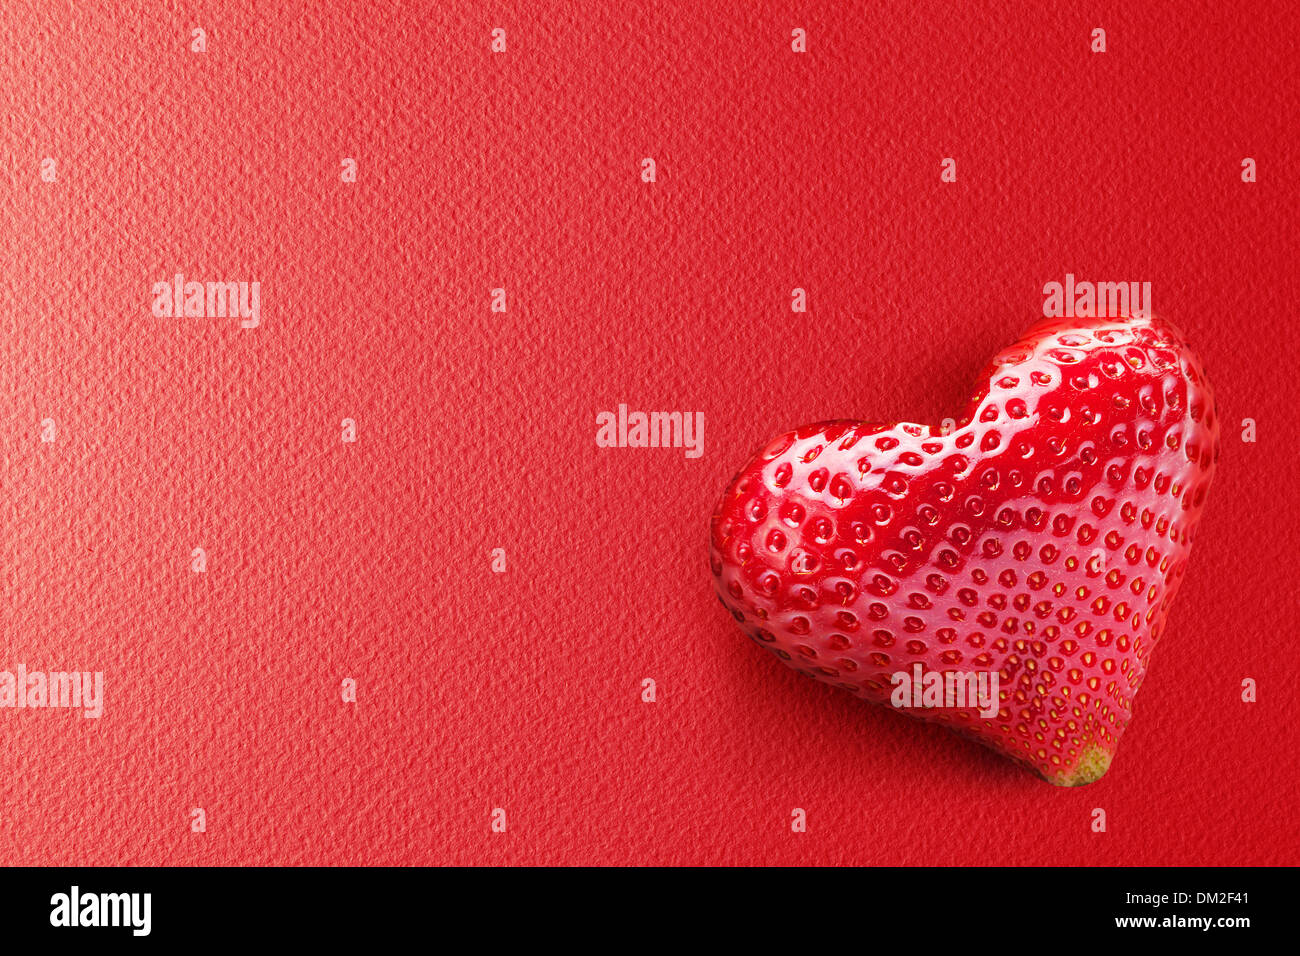 One rich strawberry fruit in form of heart on a red background. Stock Photo